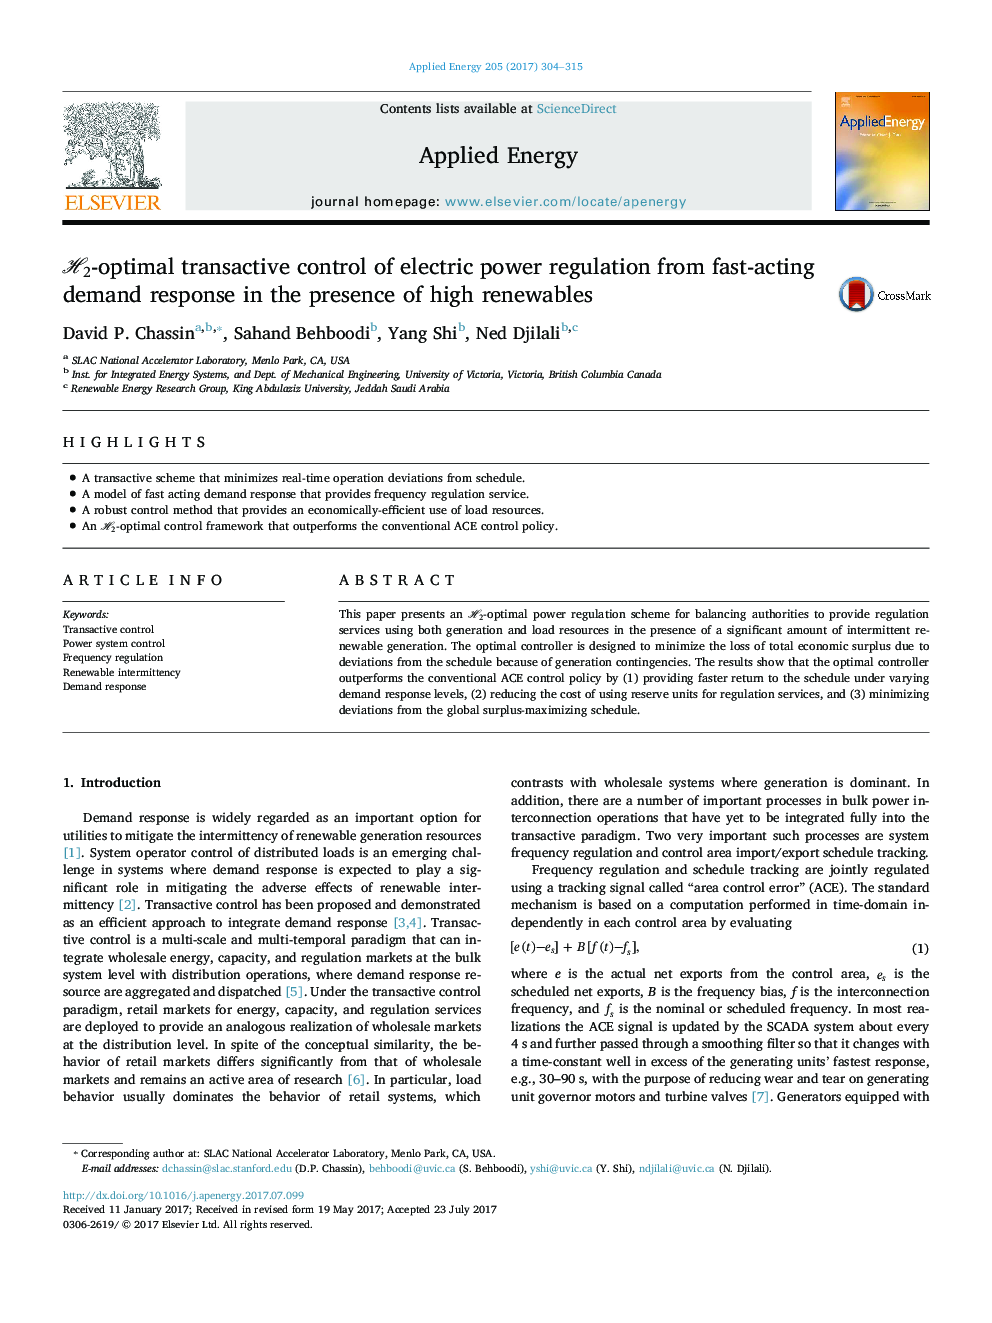 H2-optimal transactive control of electric power regulation from fast-acting demand response in the presence of high renewables